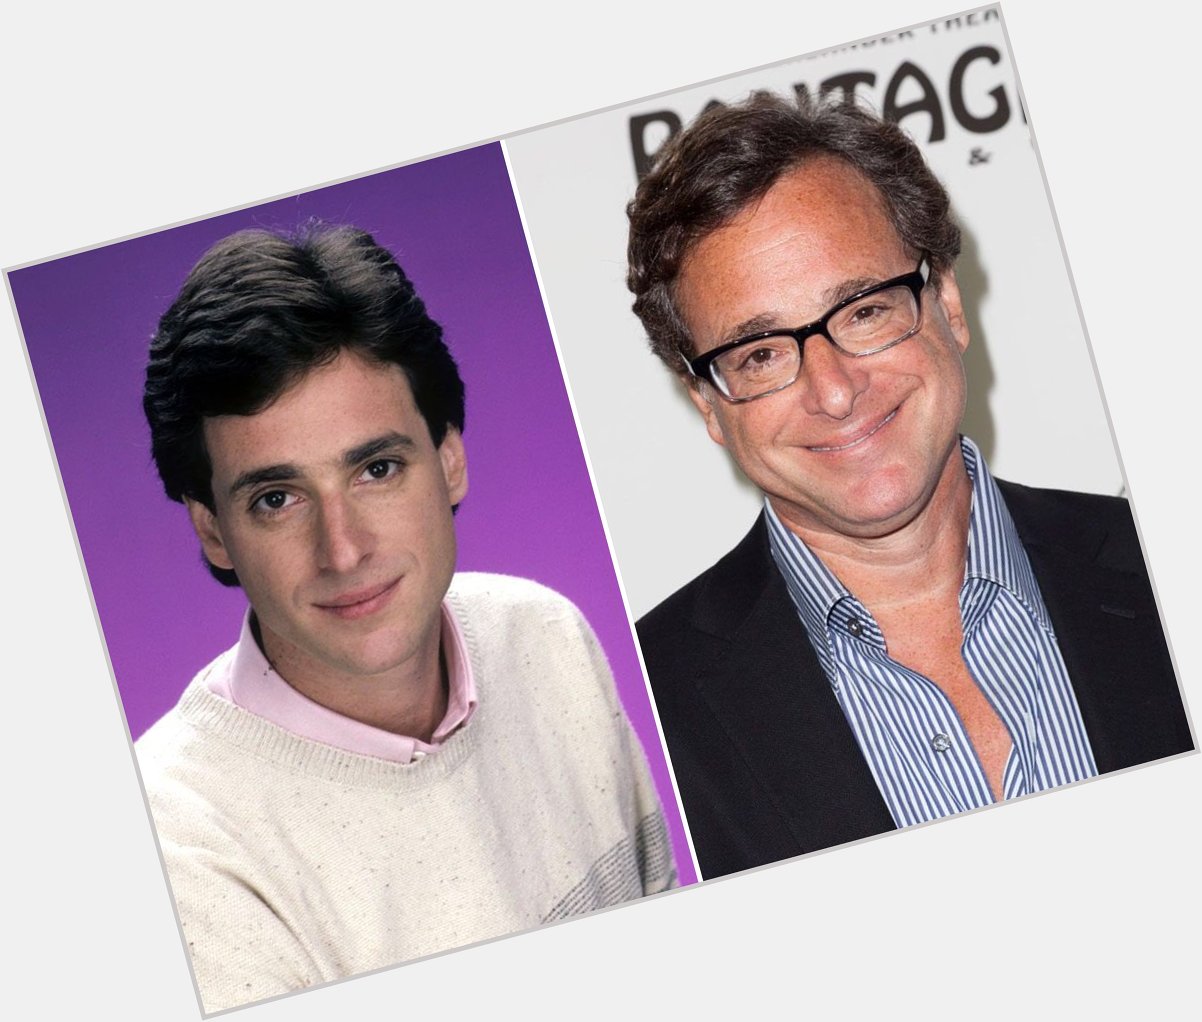 Happy 63rd Birthday to Bob Saget! The actor who played Danny Tanner in Full House and Fuller House. 